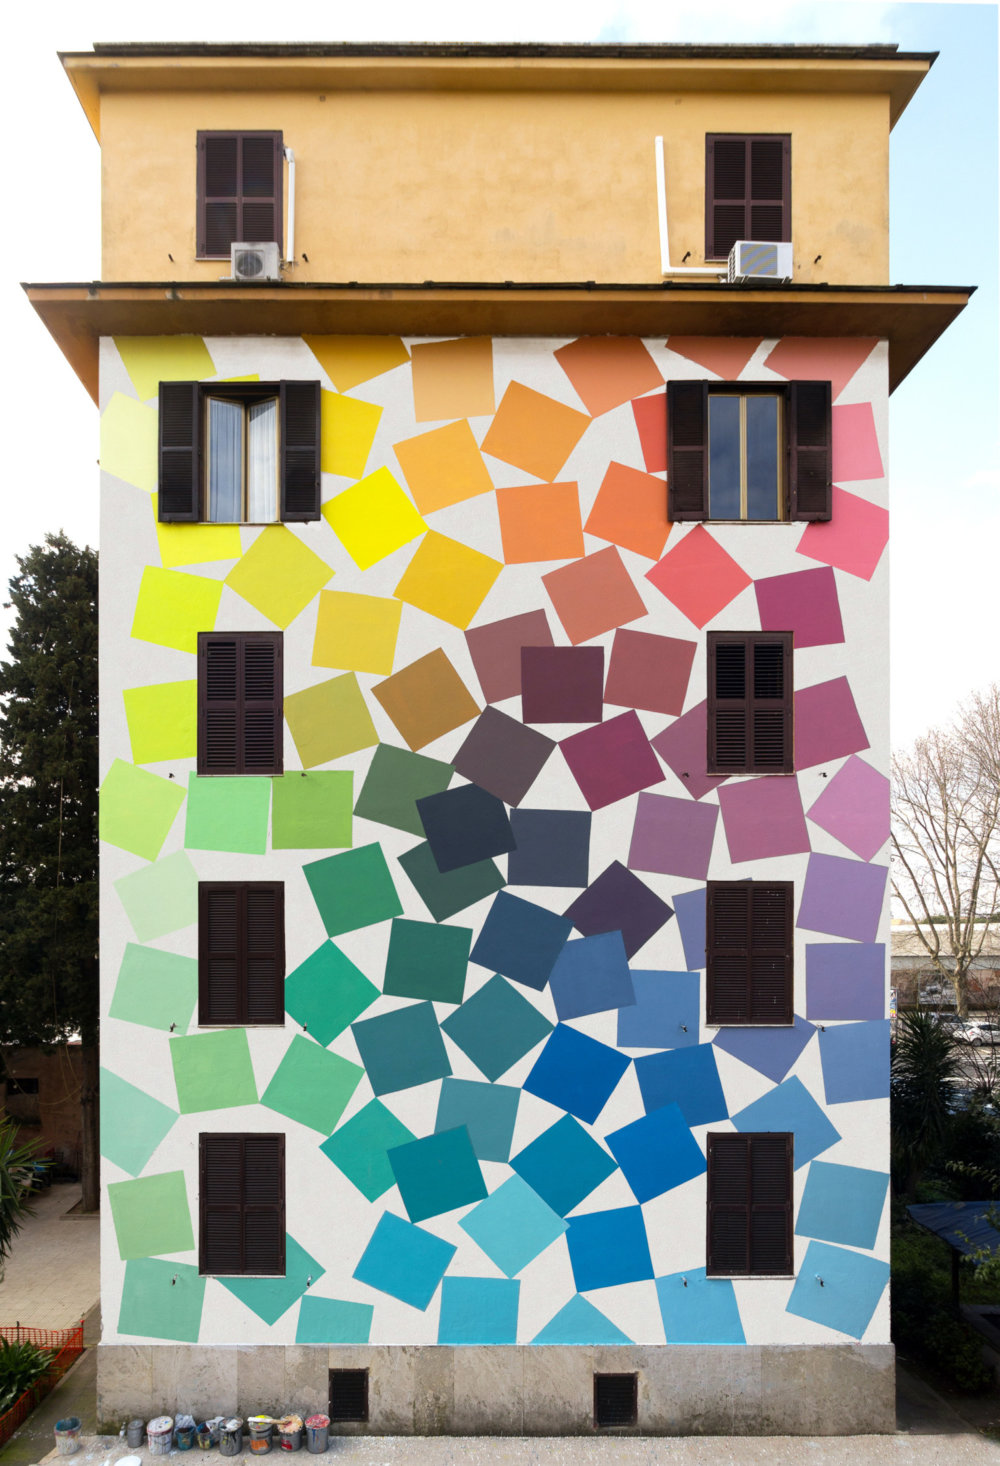 Prismatic Checkered Murals With Vivid And Contrasting Color Shades By Alberonero 6